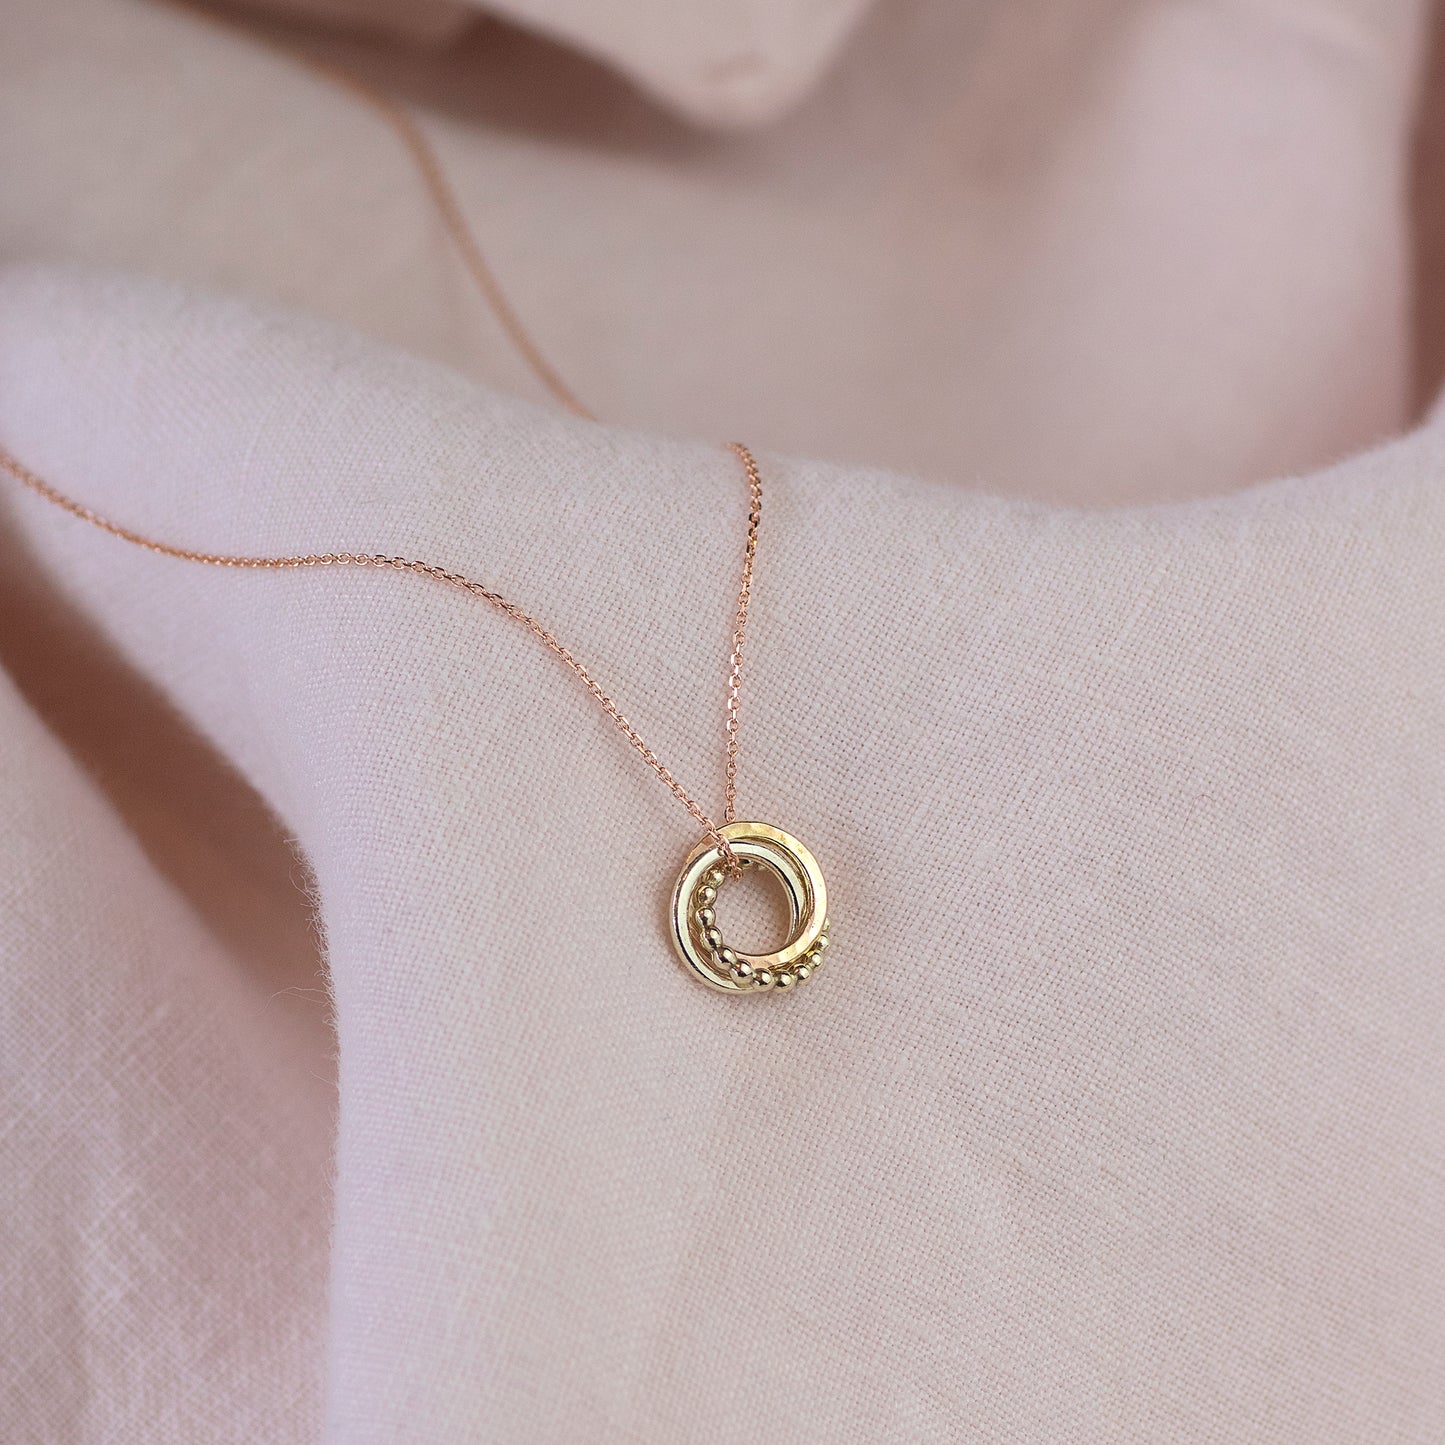 Tiny 9kt 3rd Anniversary Love Knot Necklace - White Rose Yellow Gold